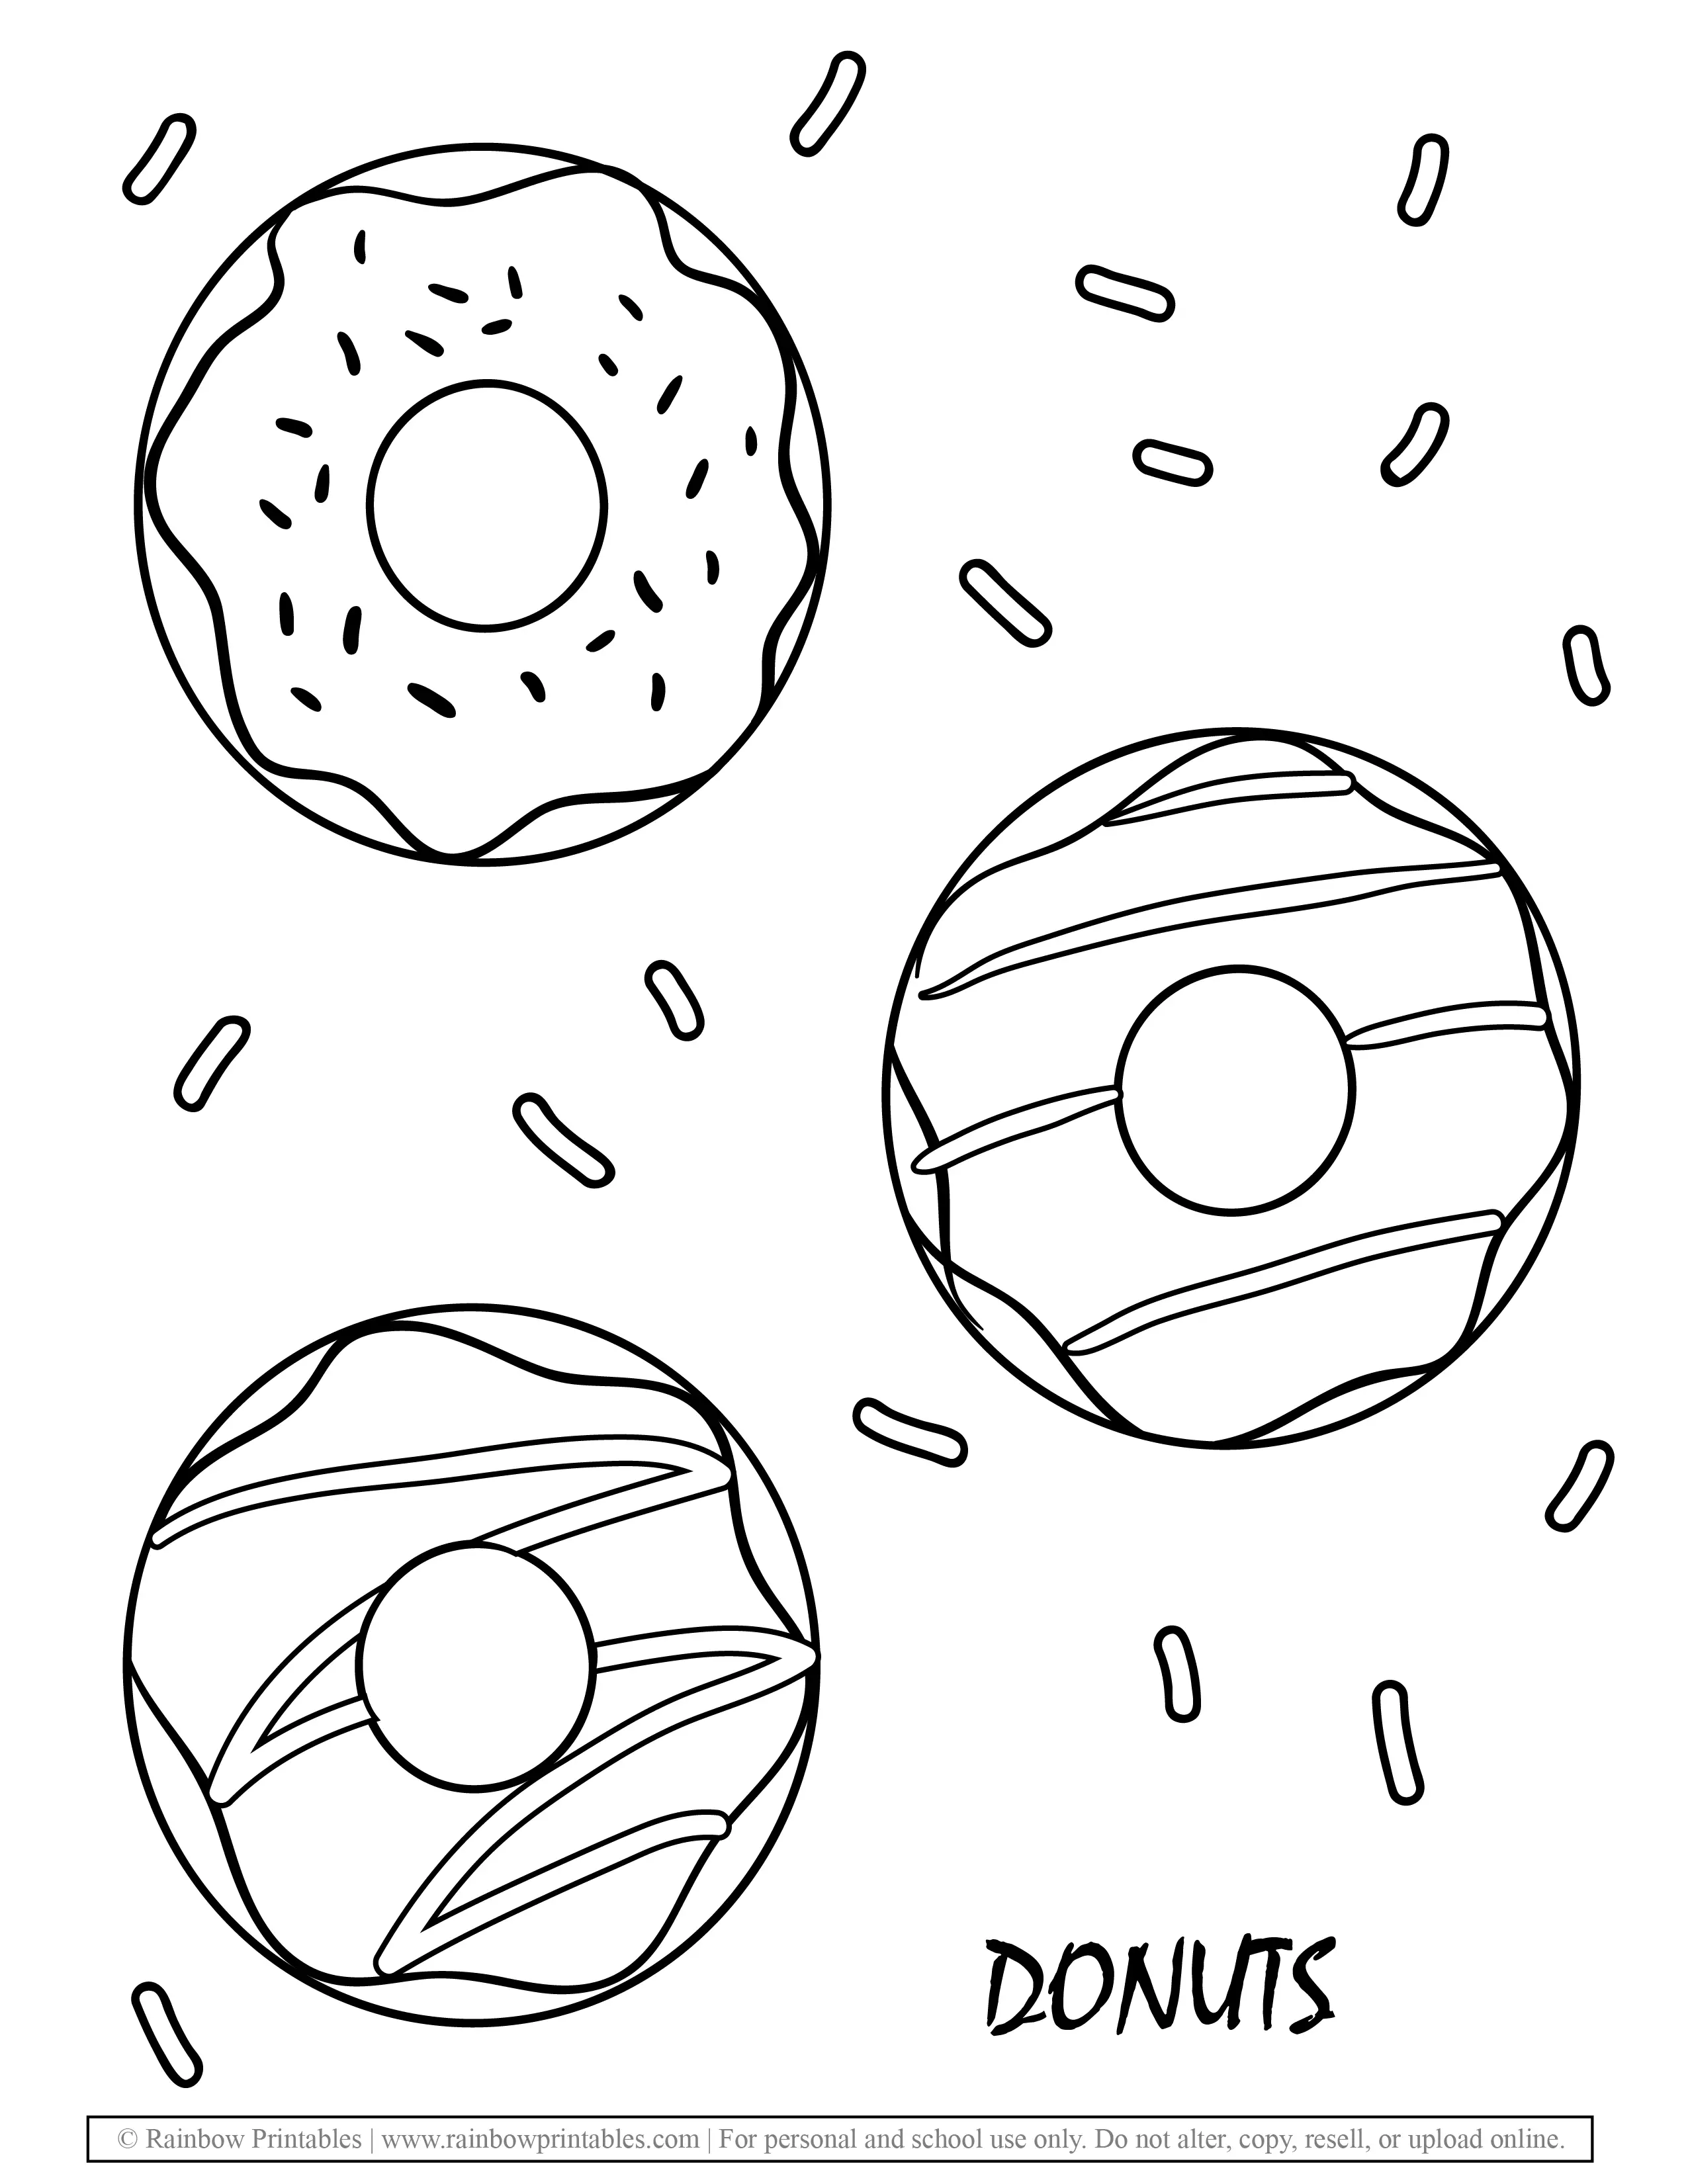 Yummy Donut Dessert American Sweetbread Coloring Pages for Kids Krispy Kreme